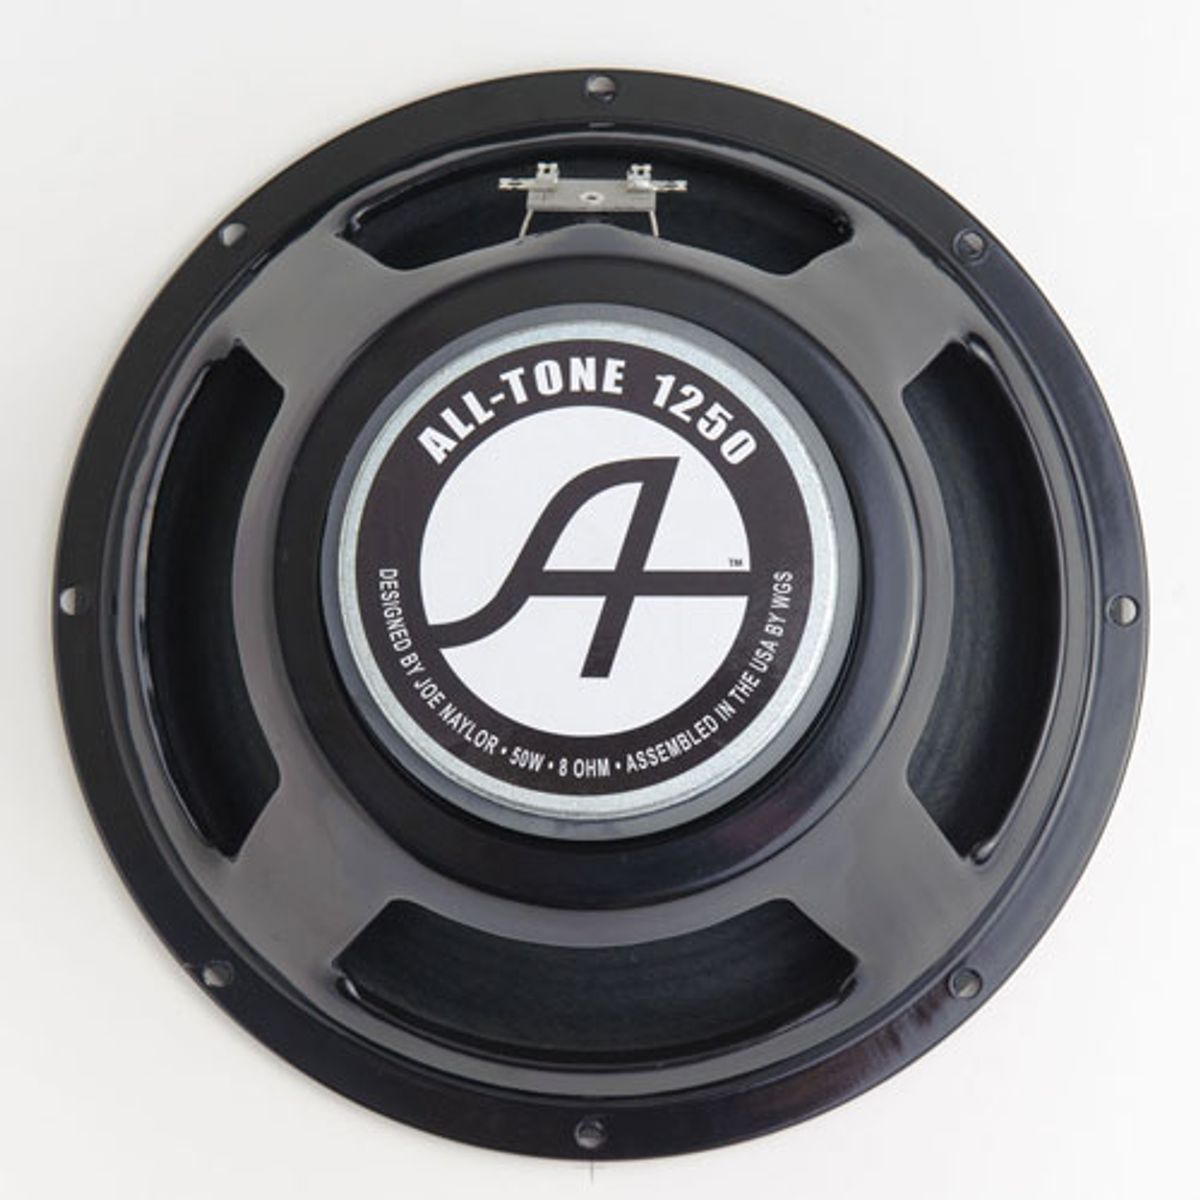 All-Tone Speakers Introduces the 1250